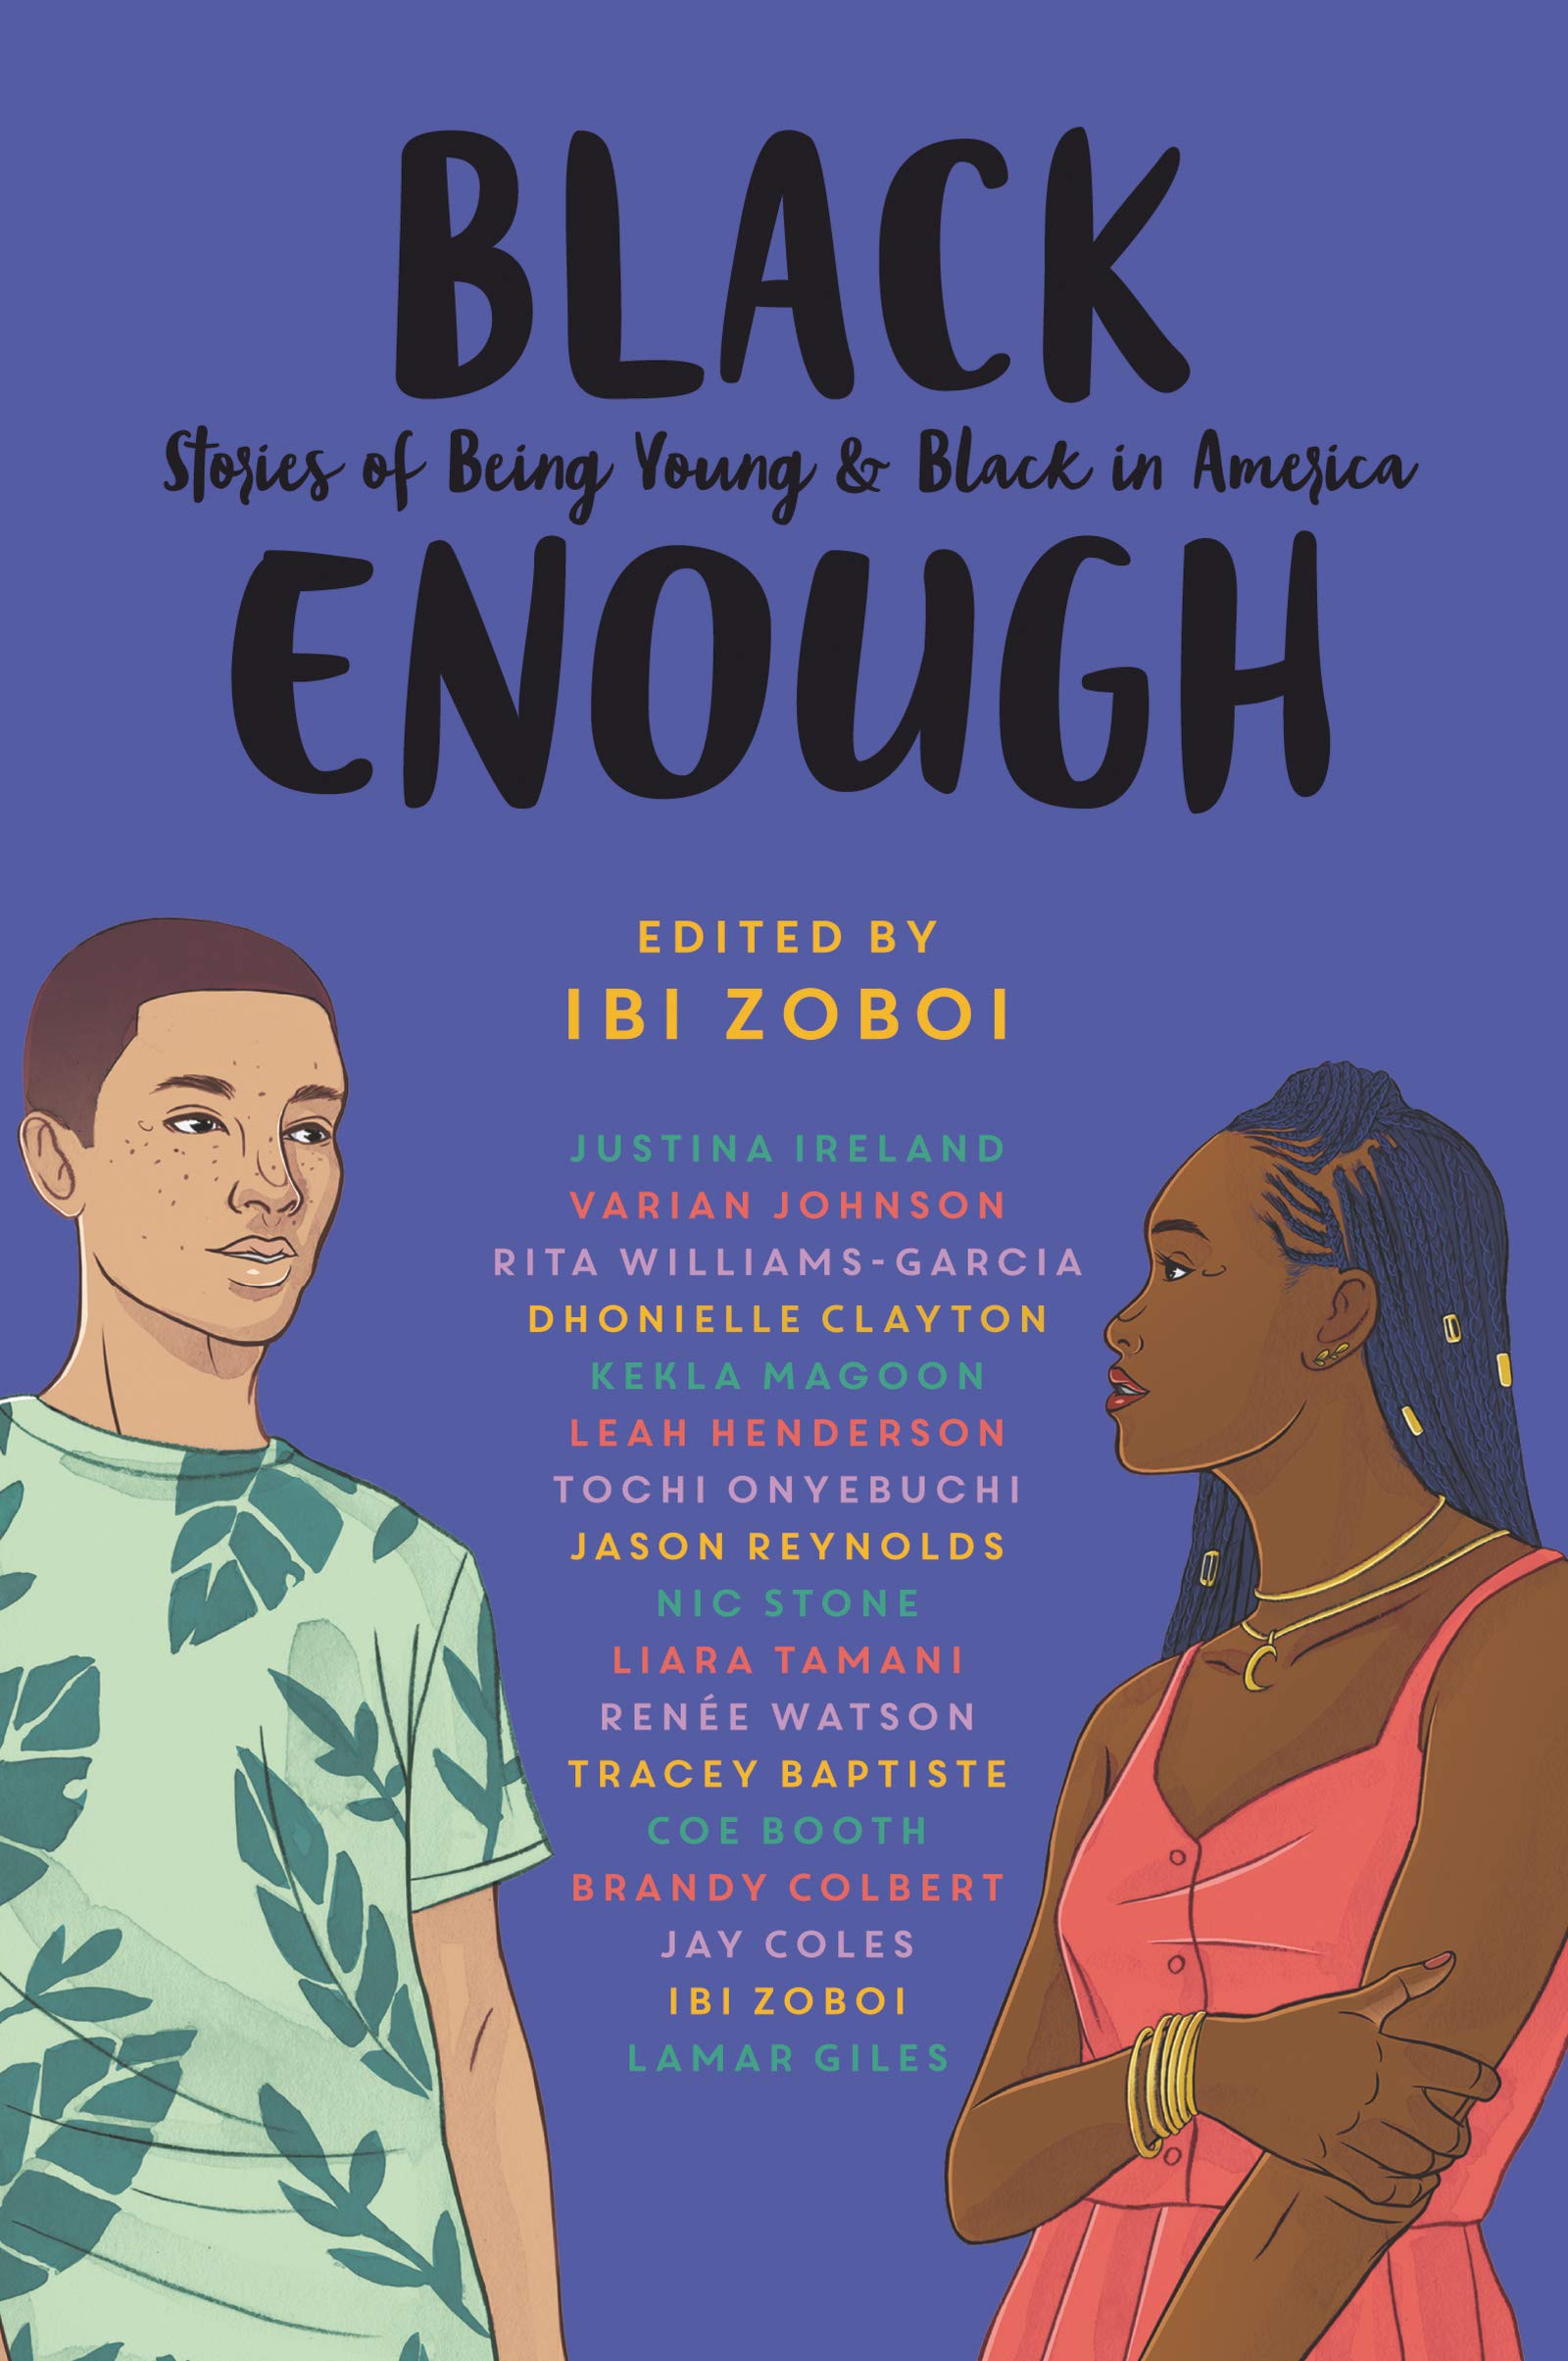 BLACK ENOUGH- STORIES OF BEING YOUNG & BLACK IN AMERICA